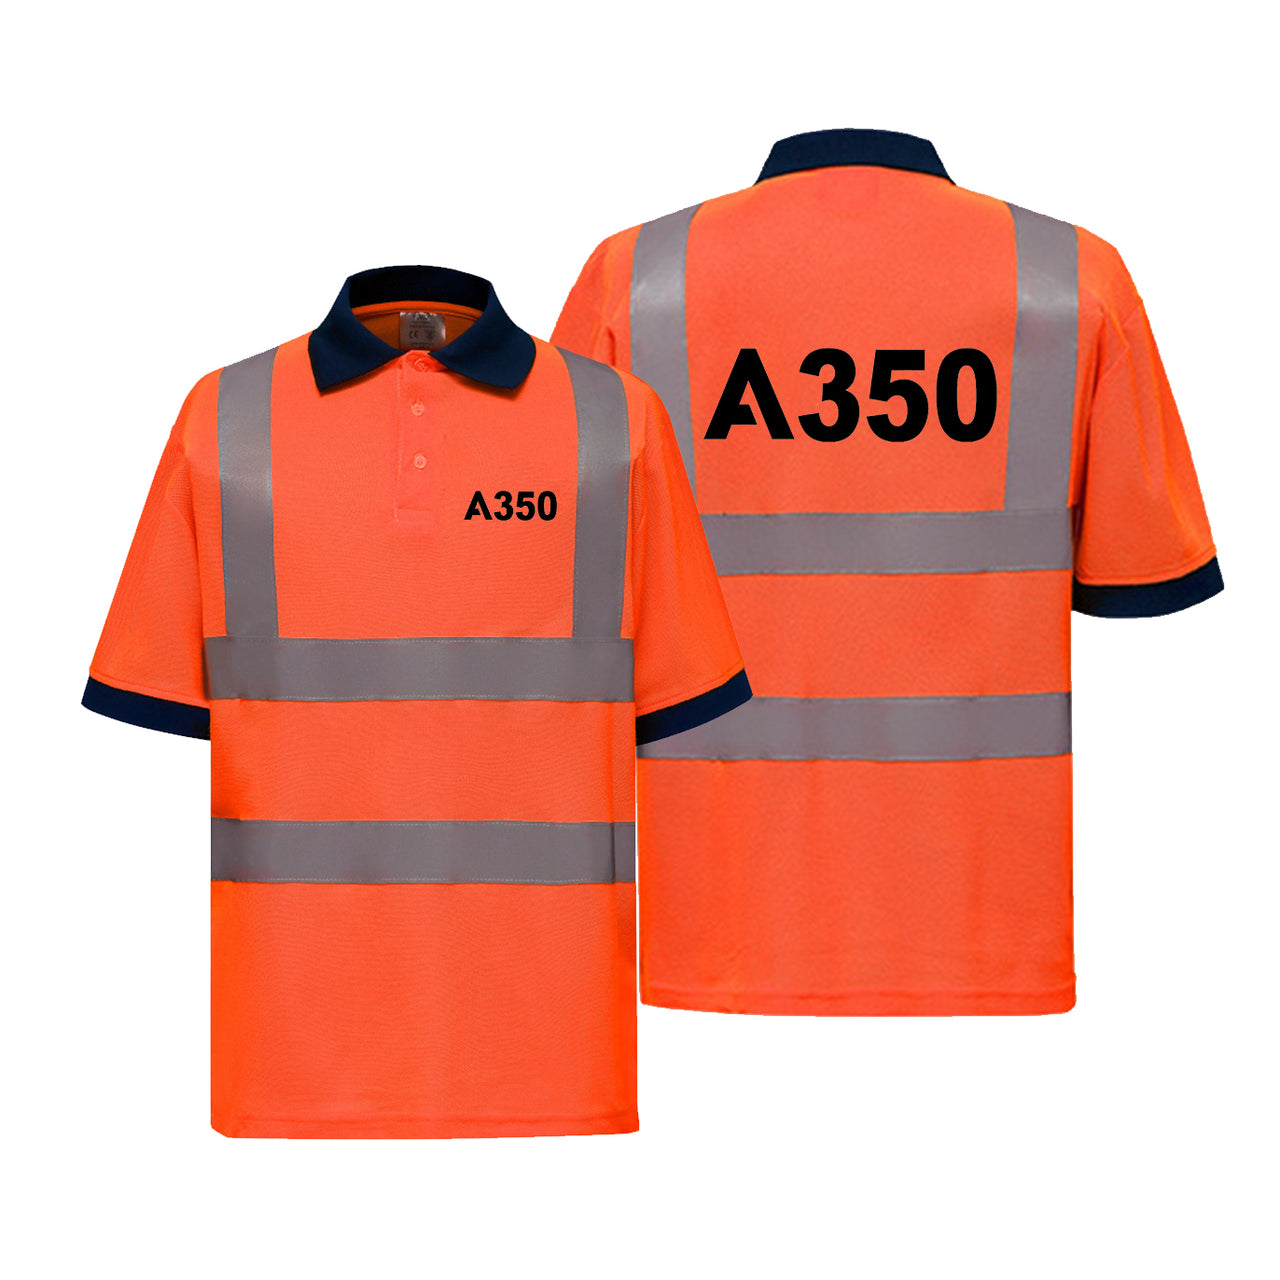 A350 Flat Text Designed Reflective Polo T-Shirts